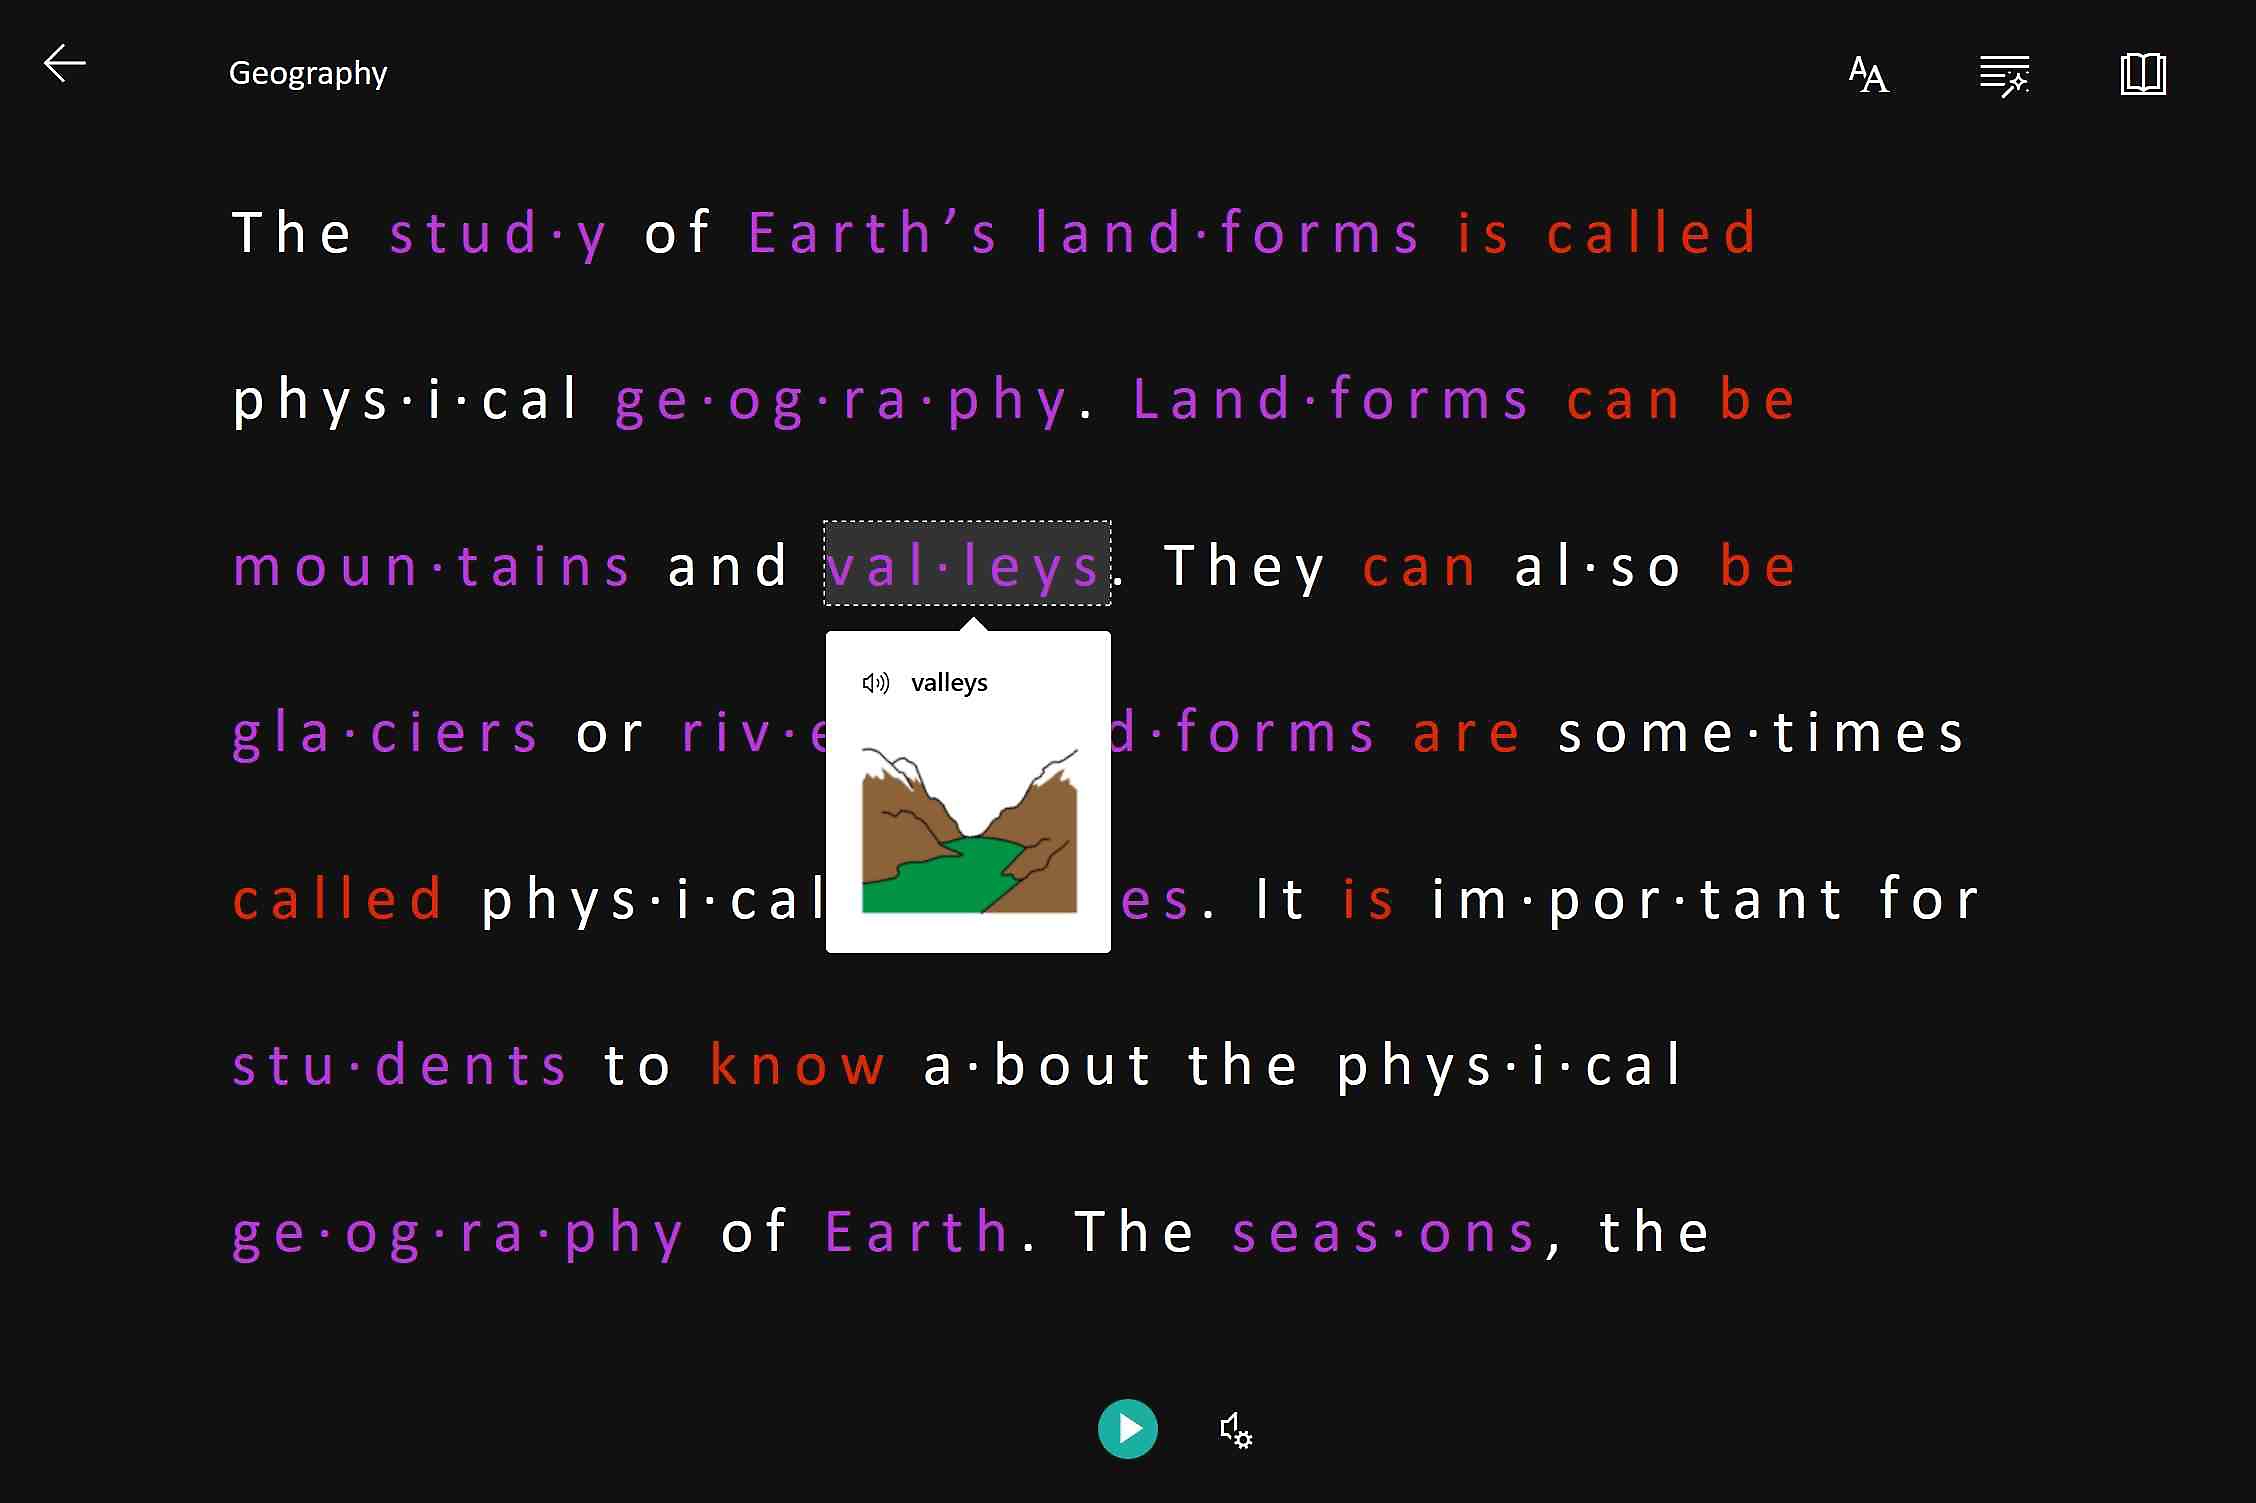 Immersive reader highlighting, pronouncing and showing an image for the word Valleys